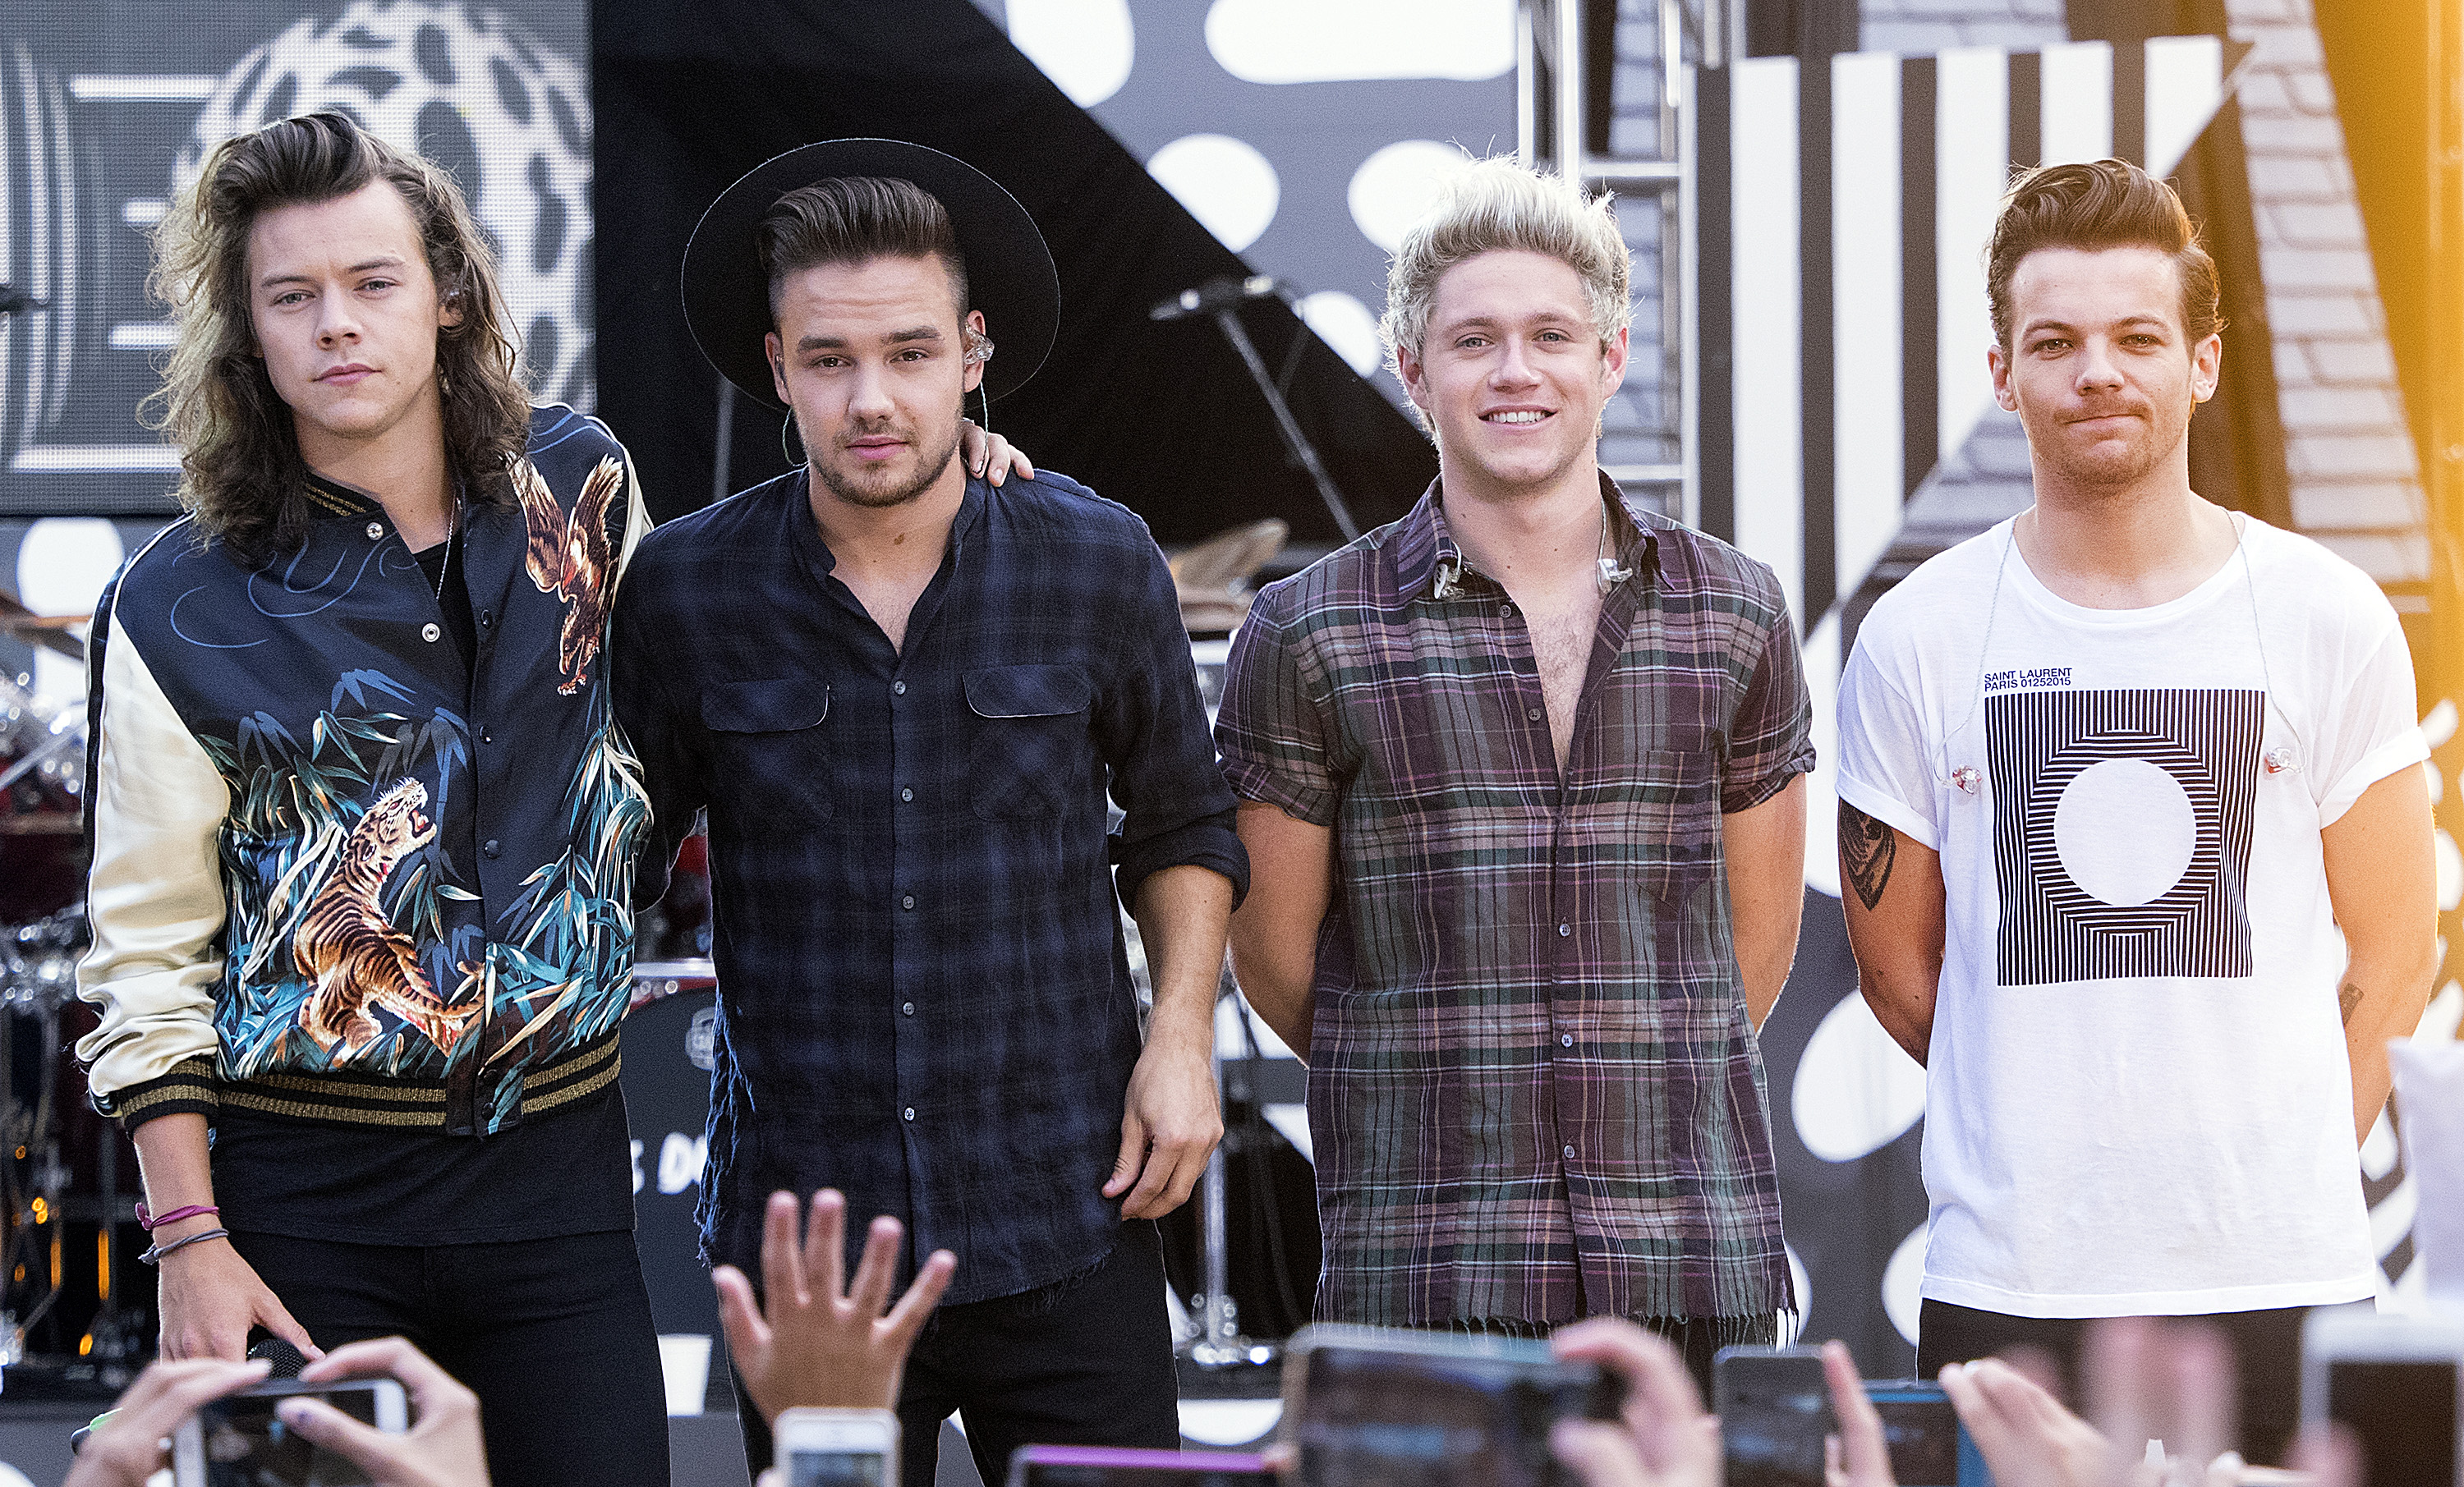 (L-R) Harry Styles, Liam Payne, Niall Horan and Louis Tomlinson of One Direction perform on "Good Morning America's Summer Concert Series" in New York City on Aug. 4, 2015. (Debra L Rothenberg—FilmMagic/Getty Images)